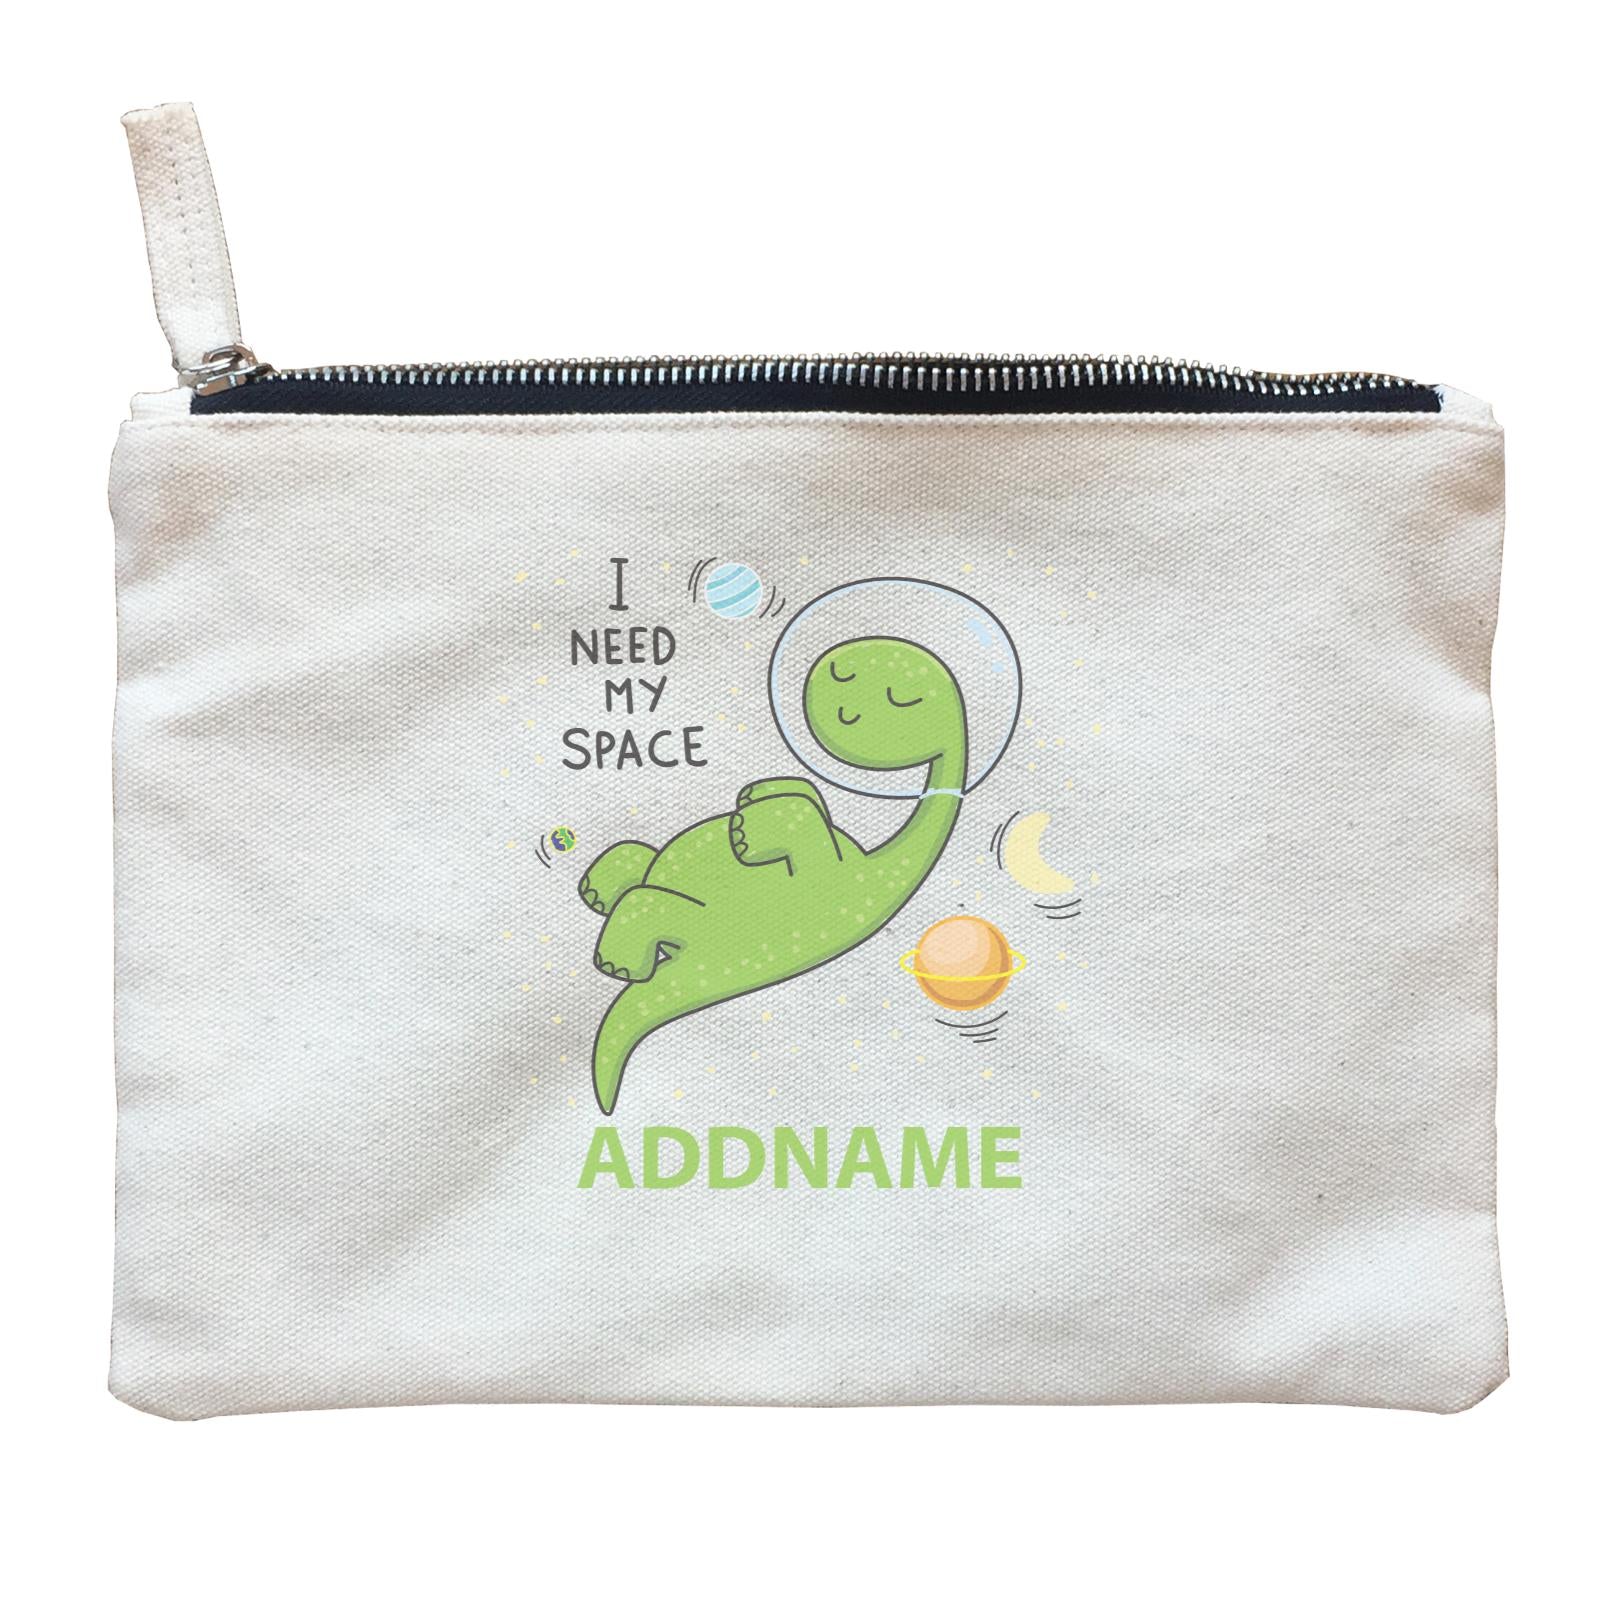 Cool Cute Dinosaur I Need My Space Addname Zipper Pouch